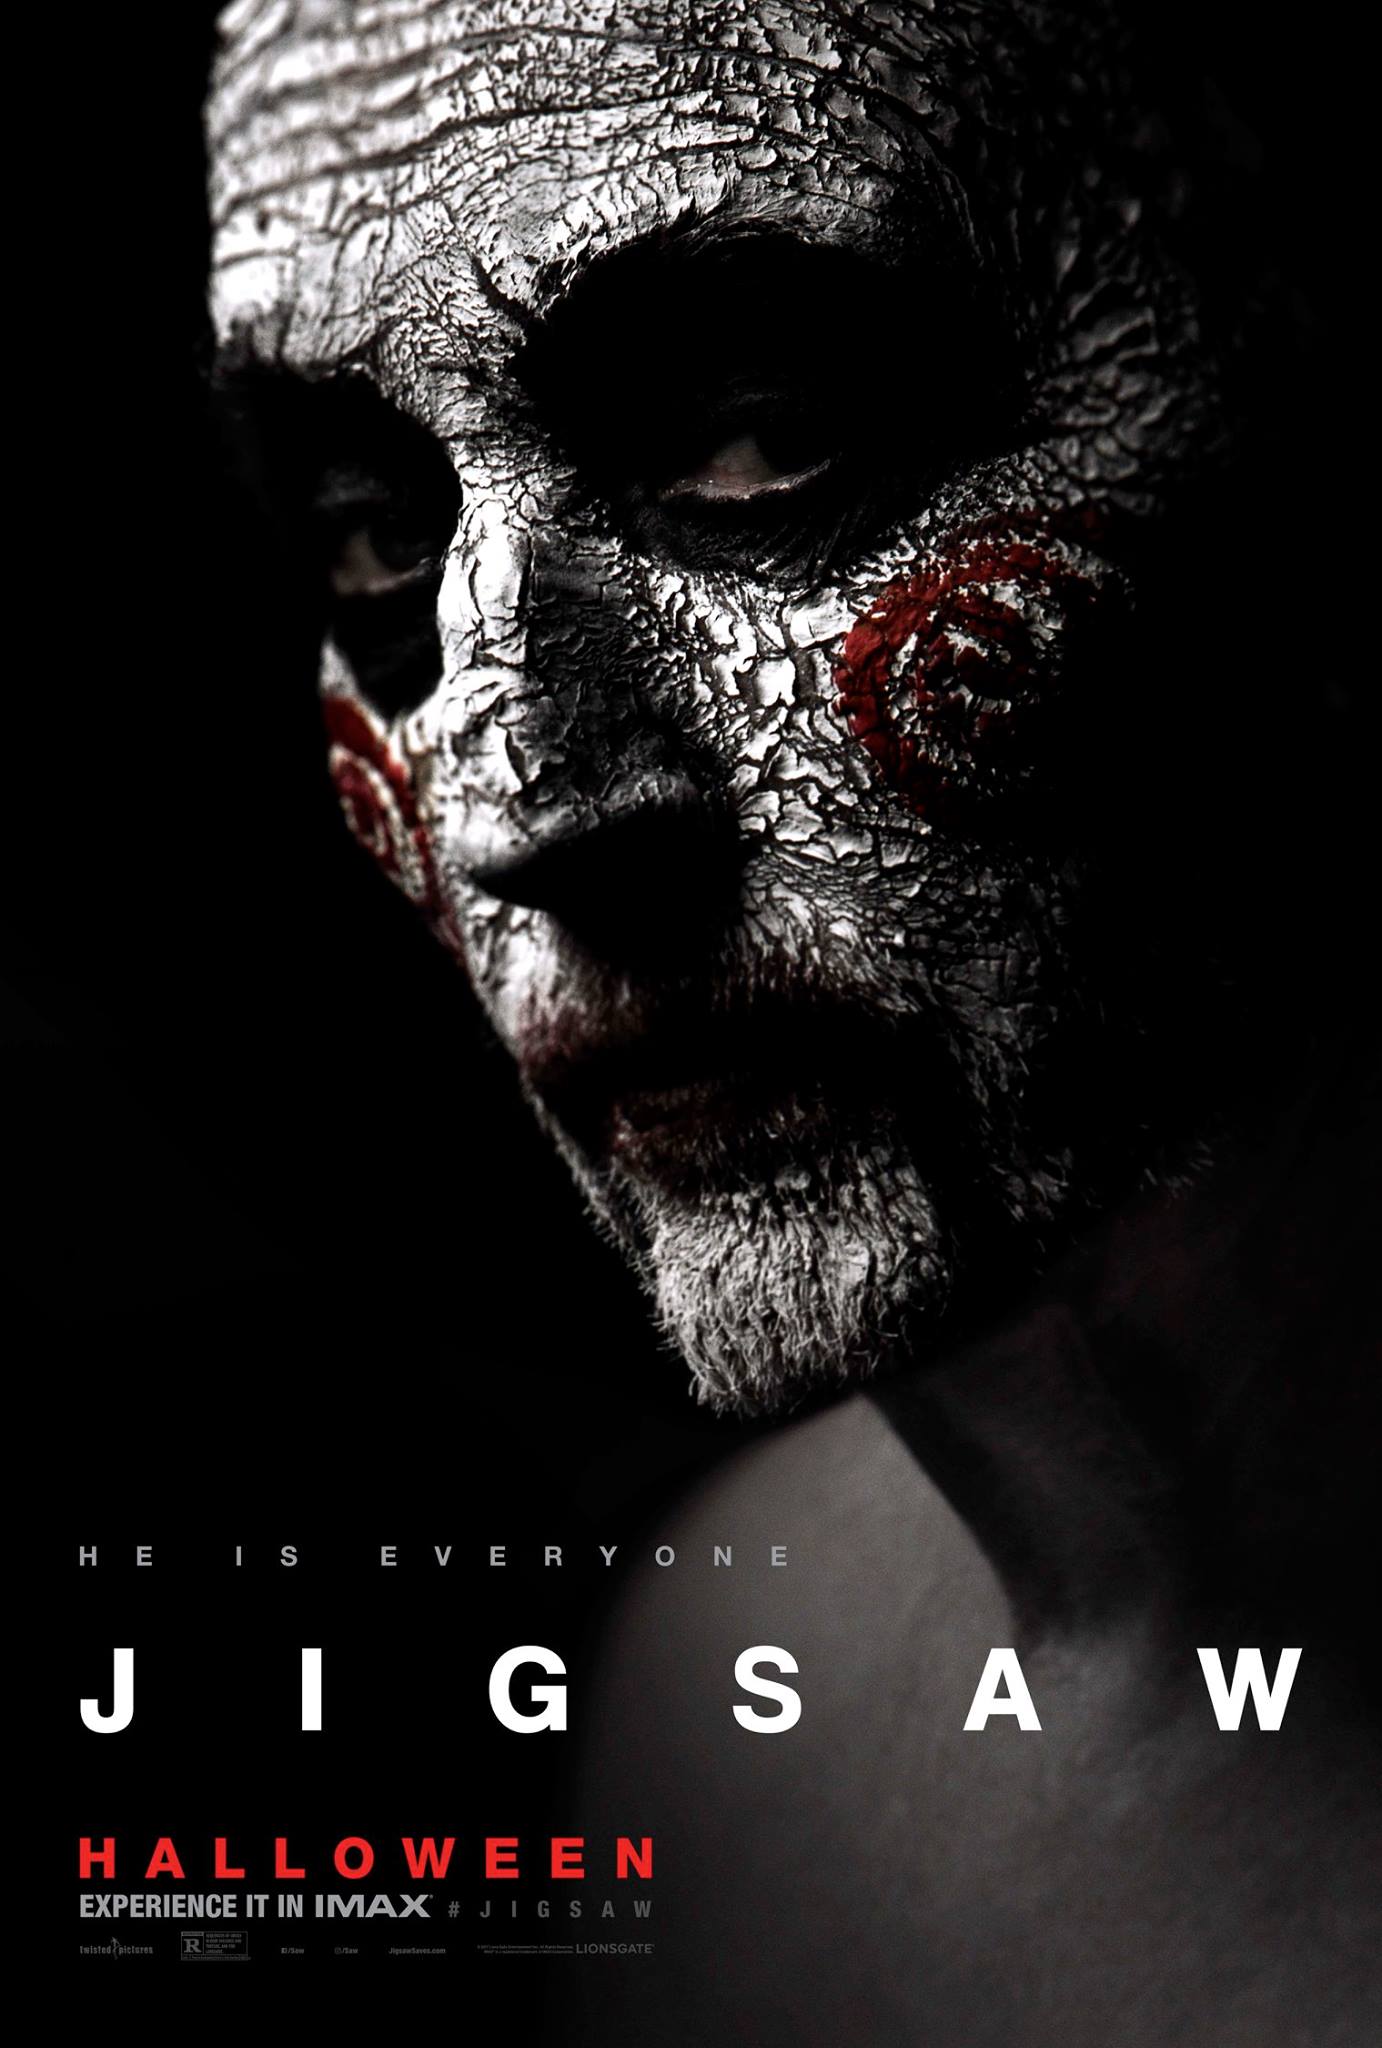 jigsaw character poster 5